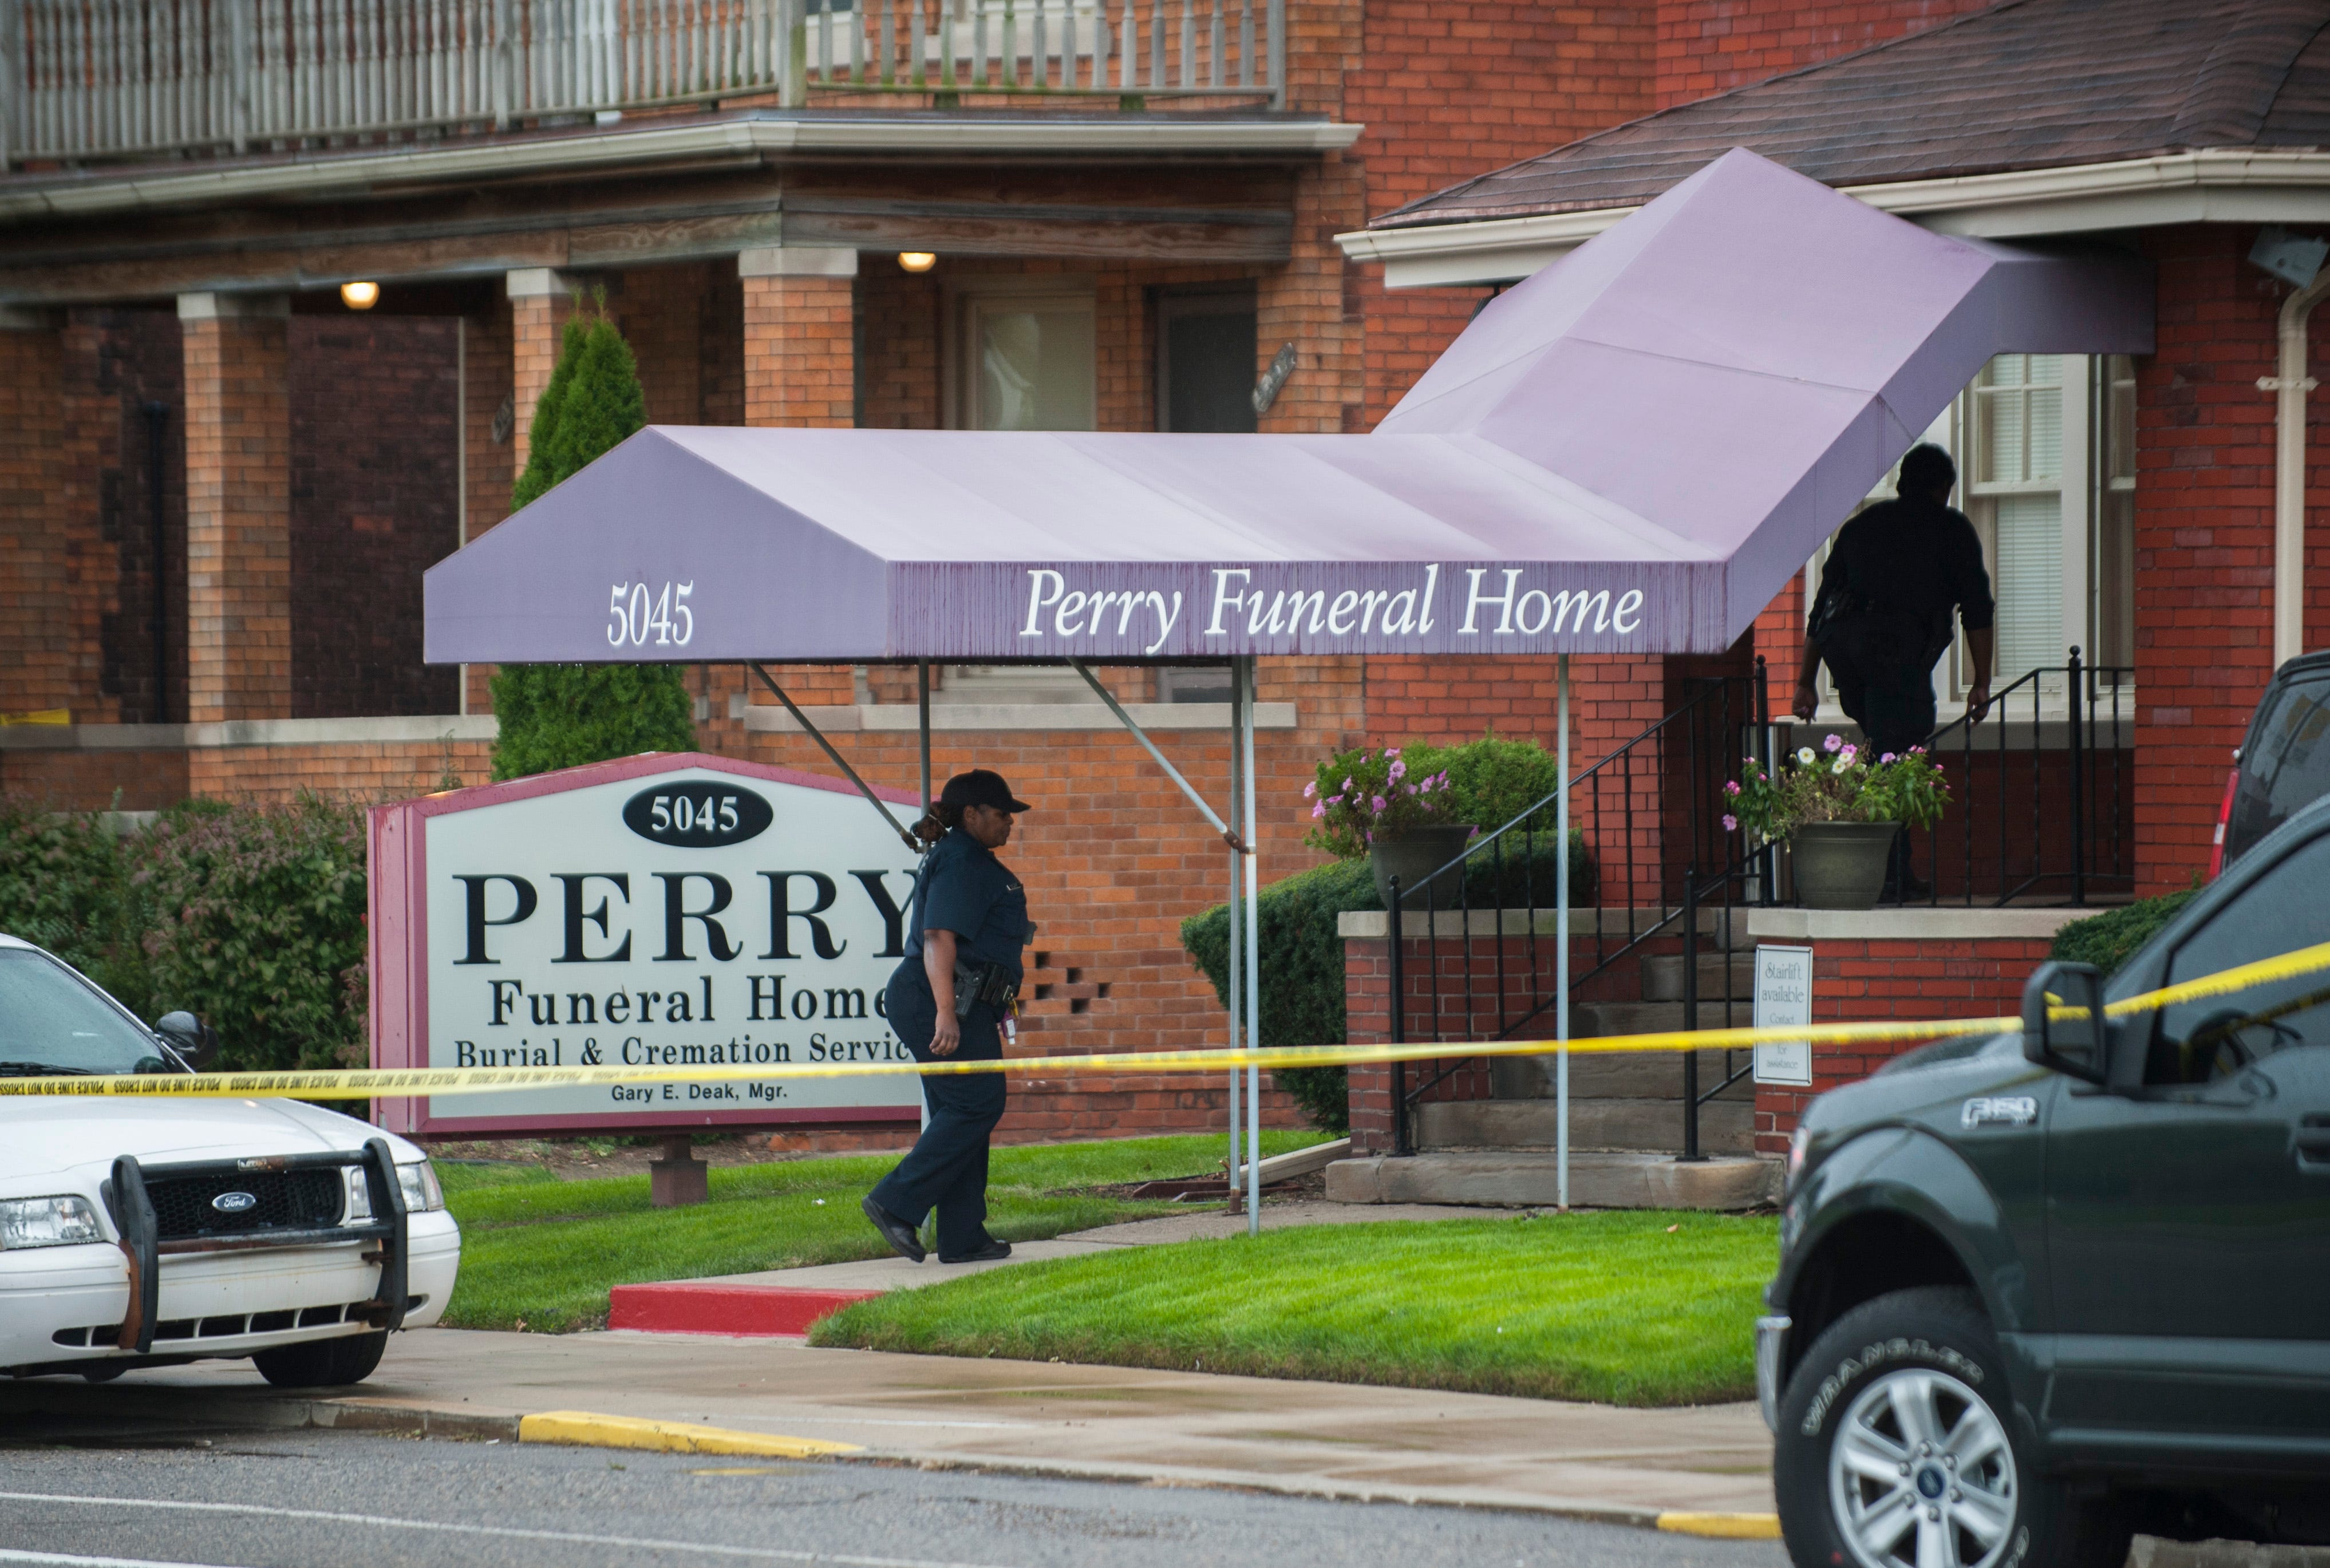 Detroit Police execute a search warrant at Perry Funeral Home in Detroit Friday afternoon, October 19, 2018. "We served a warrant there," Detroit Police Chief James Craig said. "We're looking for evidence of improper disposal of remains or any other improprieties."